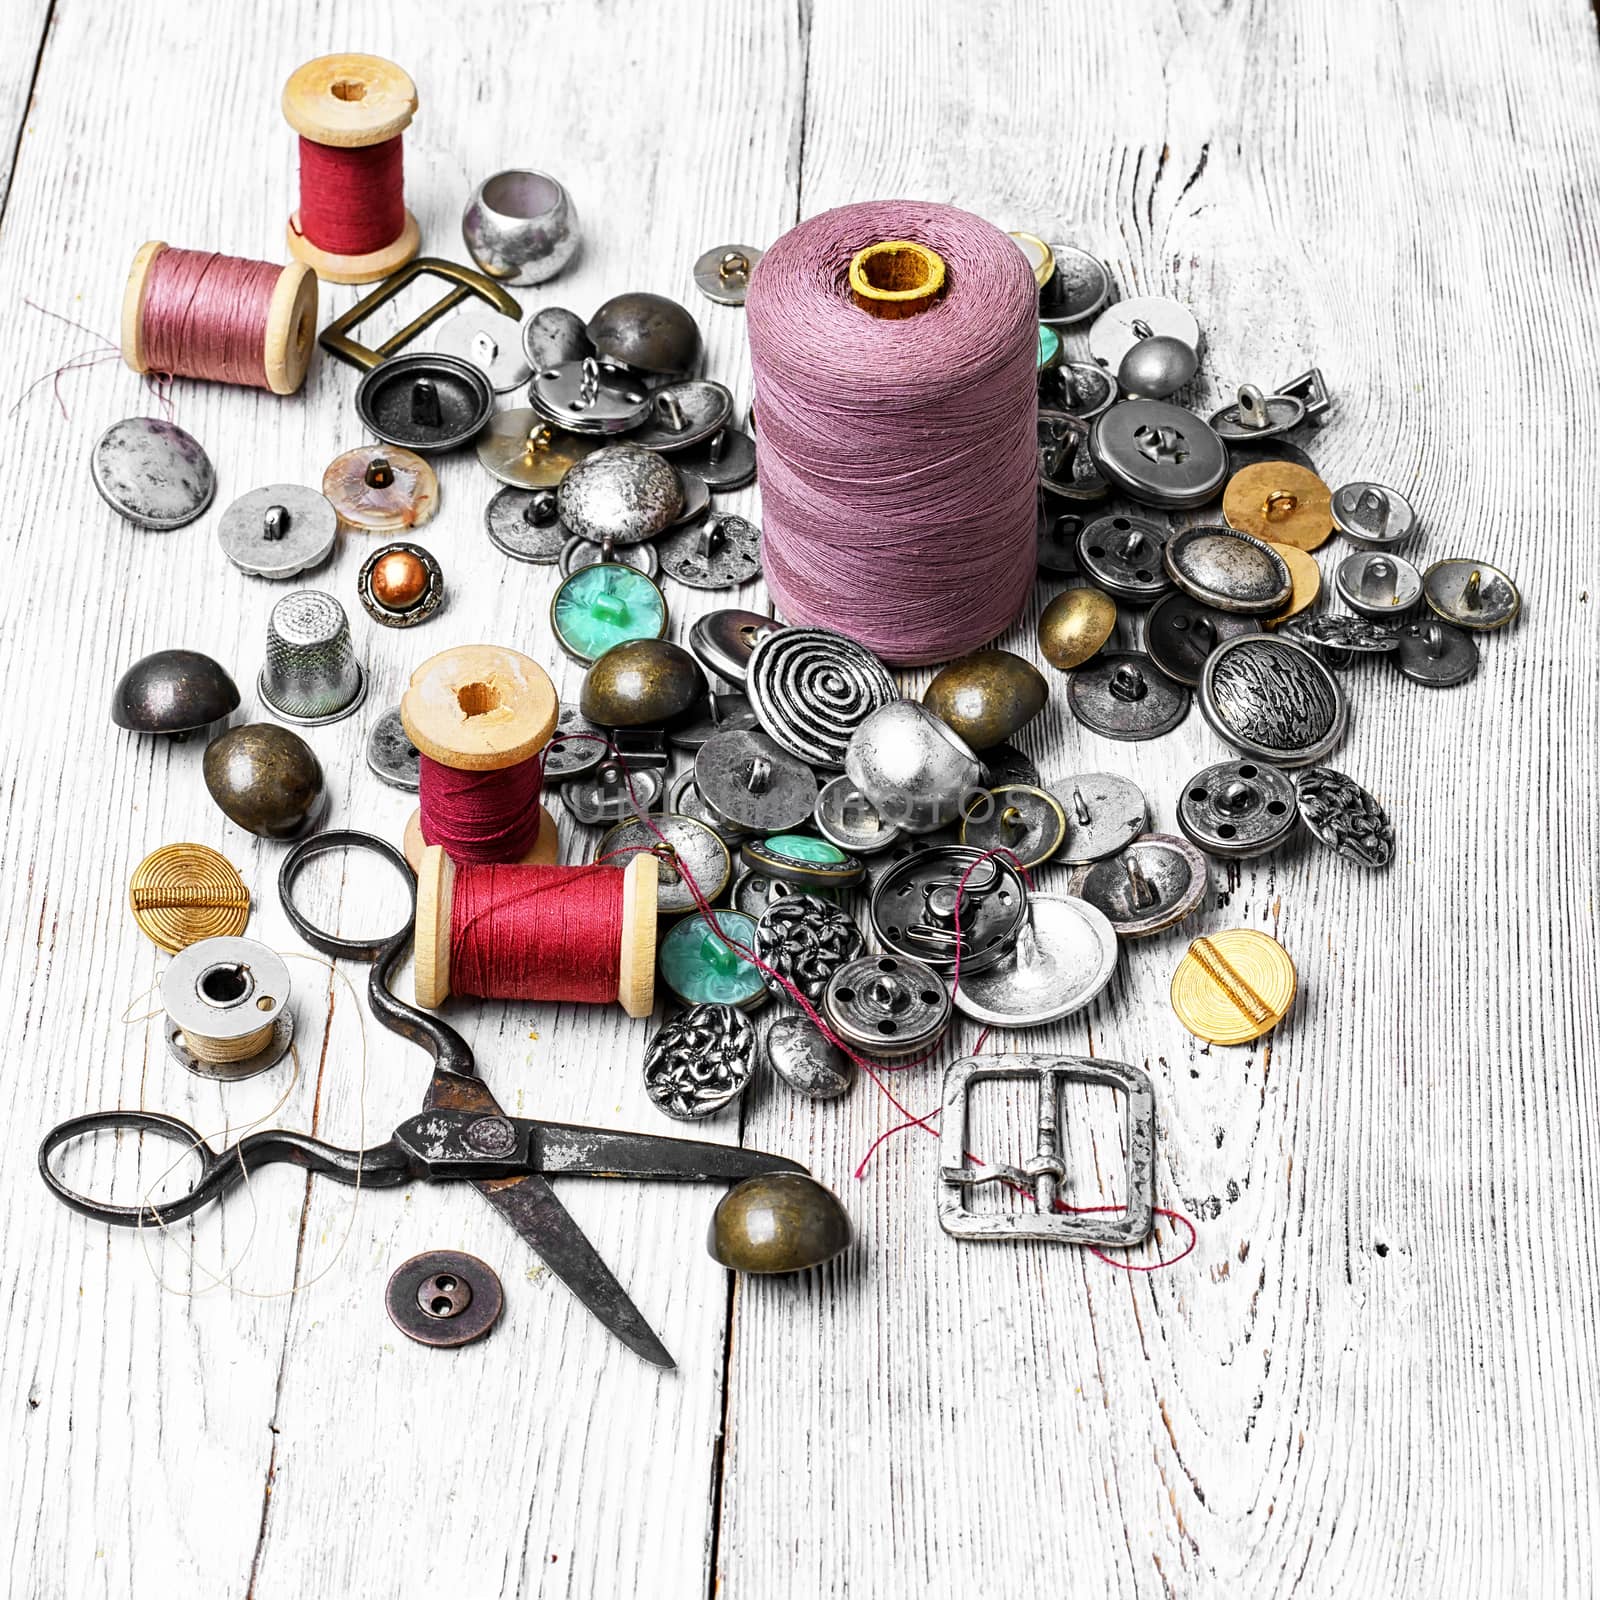 Spools of sewing threads and buttons from clothing